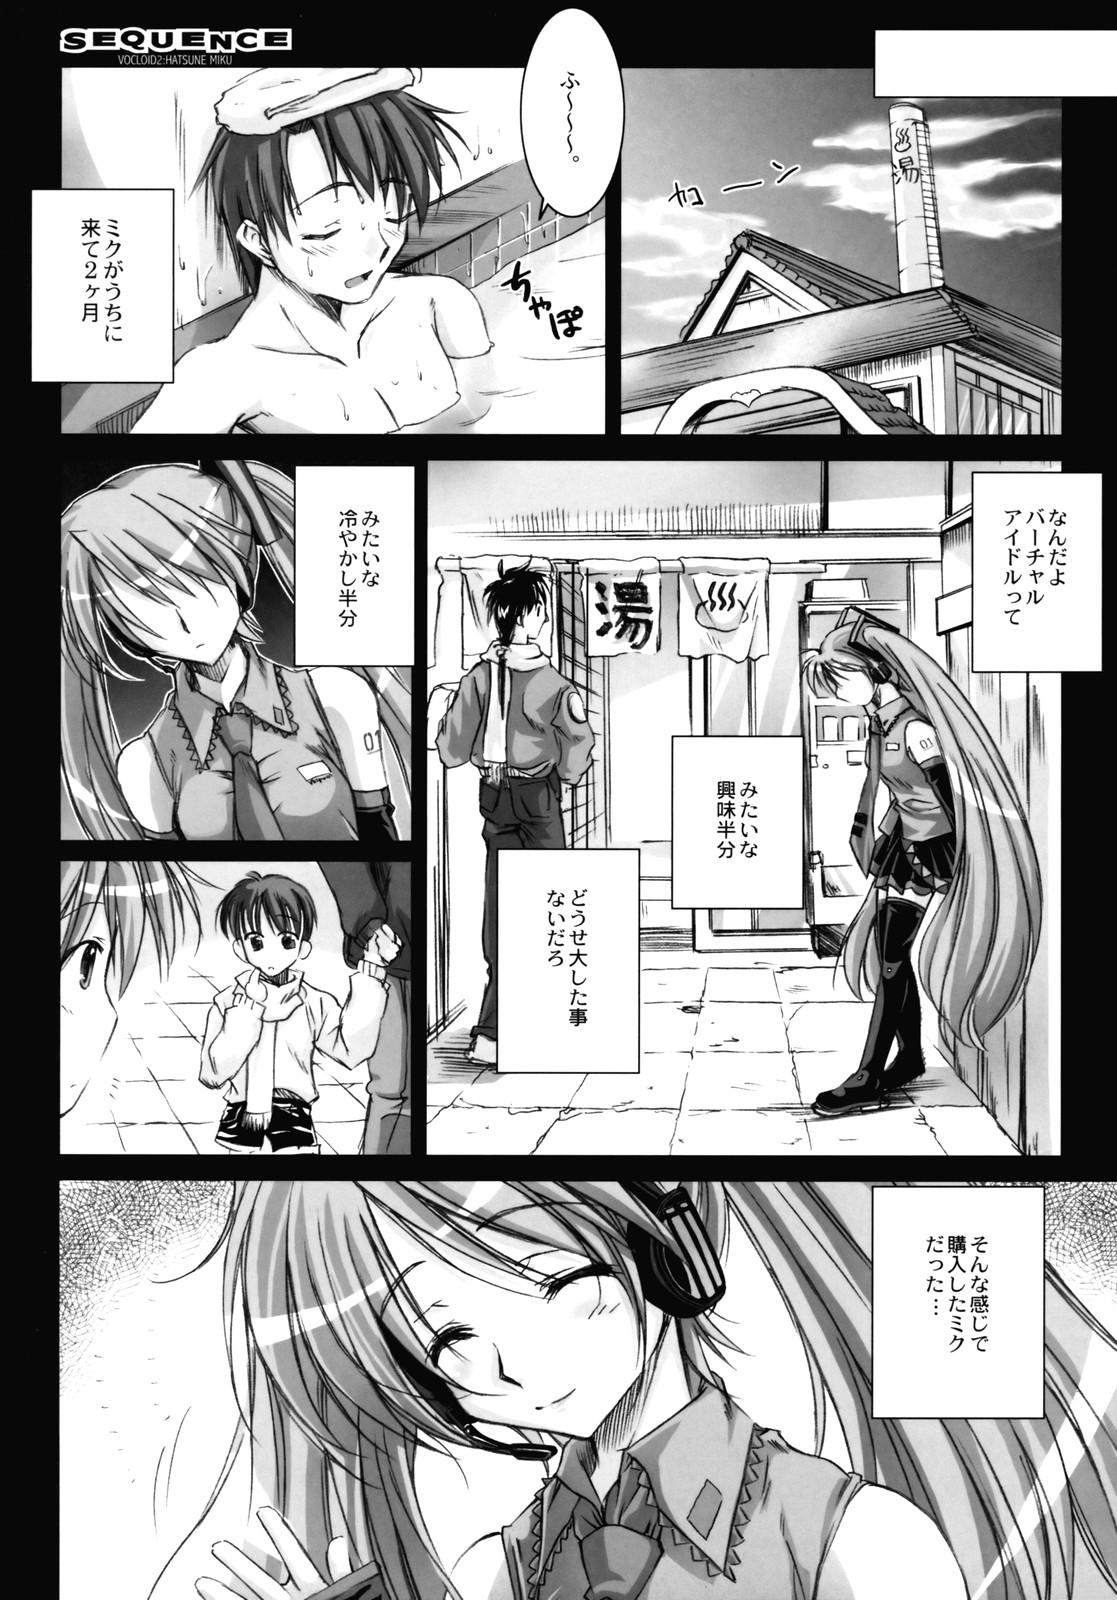 Step Brother SEQUENCE - Vocaloid Hot Wife - Page 6